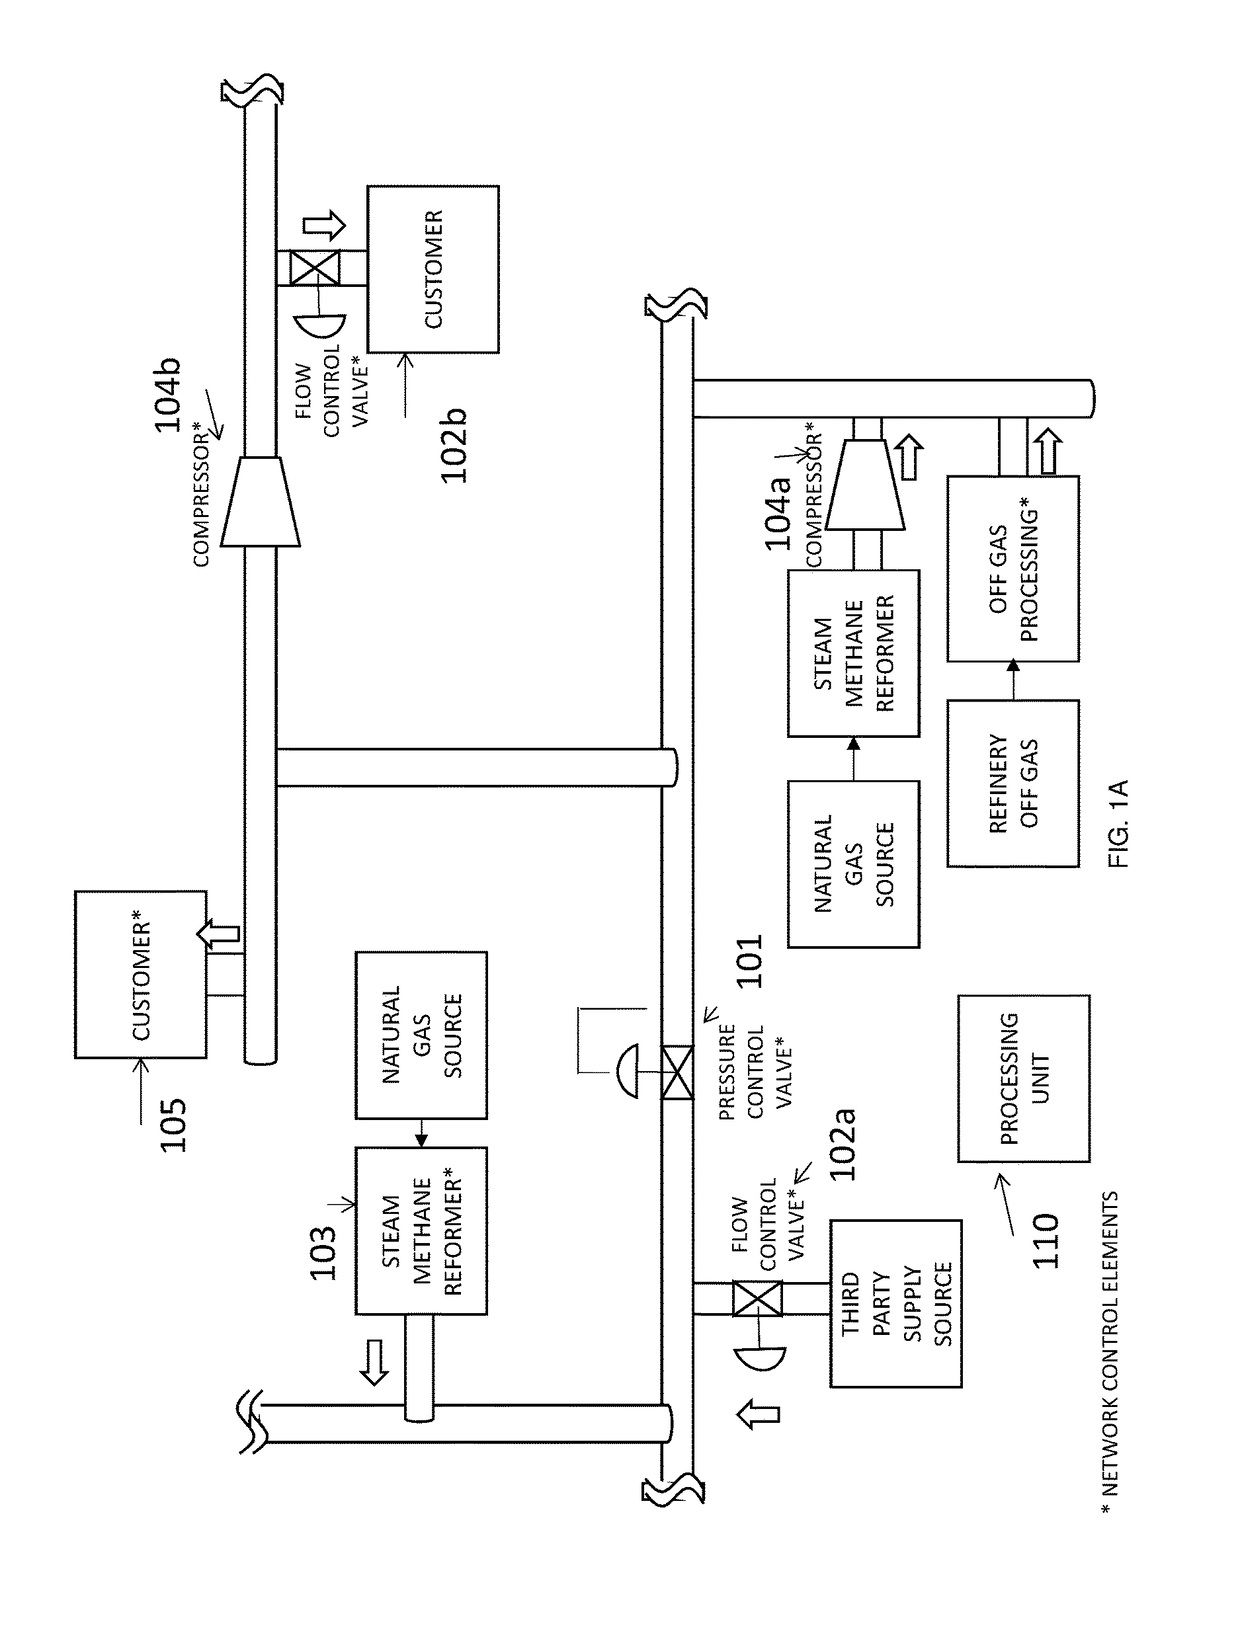 Control system in a gas pipeline network to satisfy demand constraints